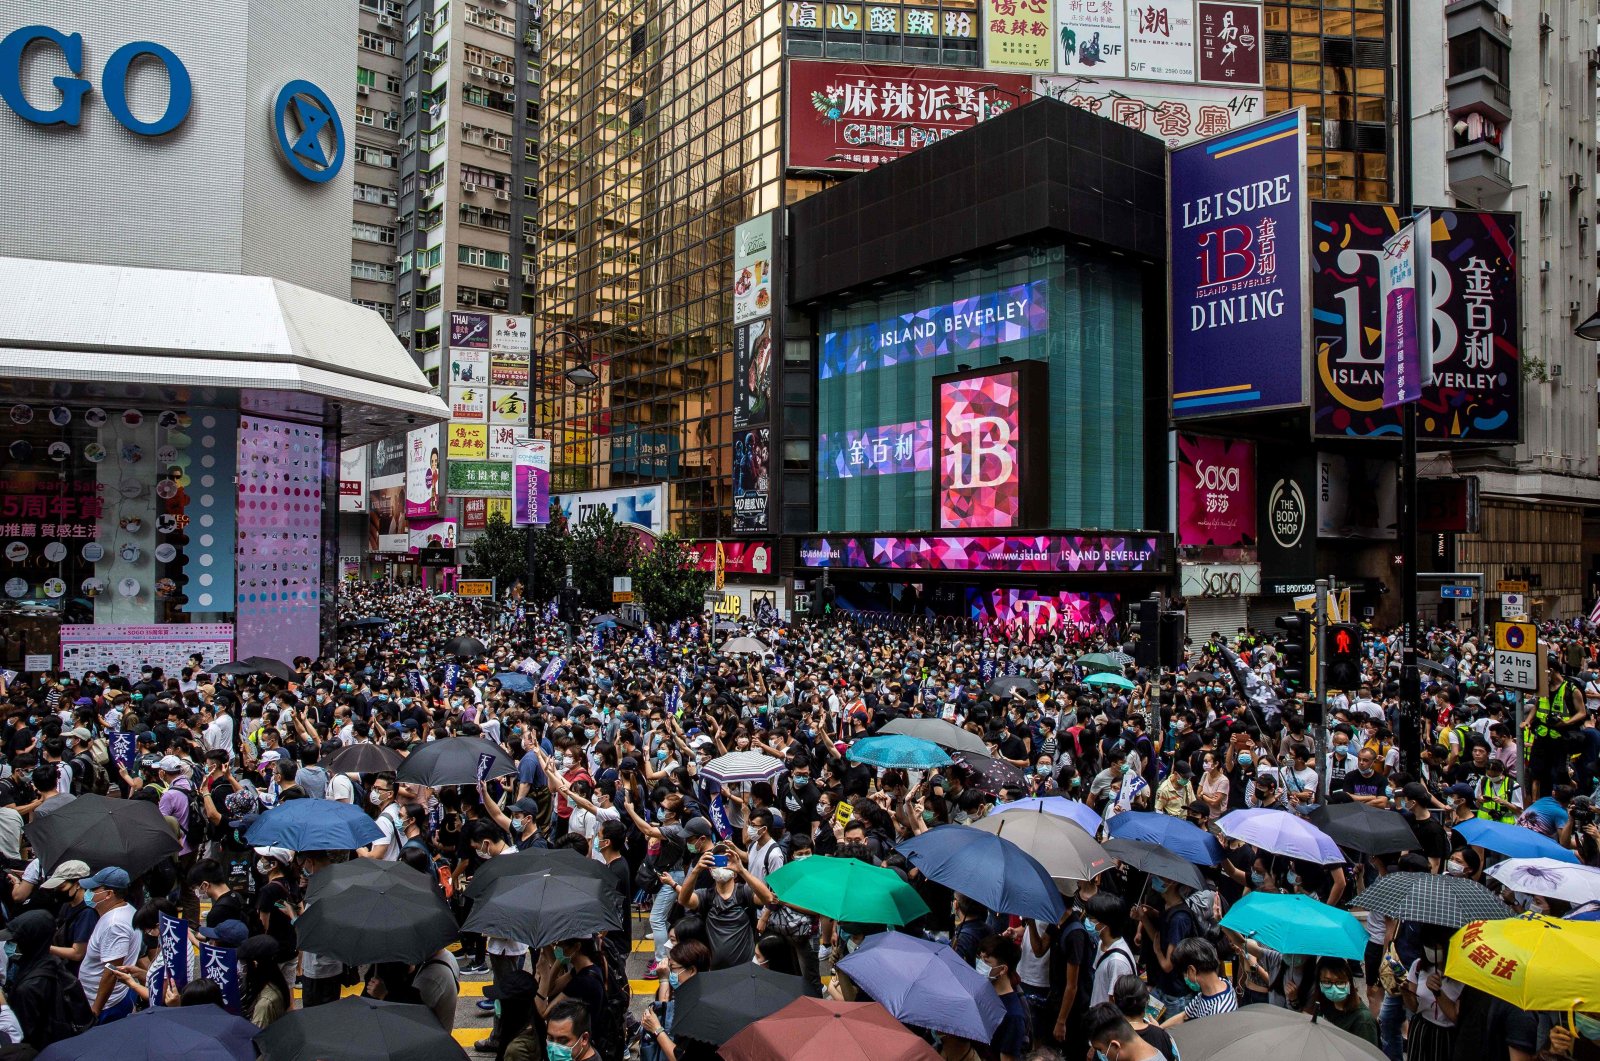 Pro-democracy protesters gather in Causeway Bay district of Hong Kong on May 24, 2020, ahead of planned protests against a proposal to enact new security legislation in Hong Kong. (AFP Photo)